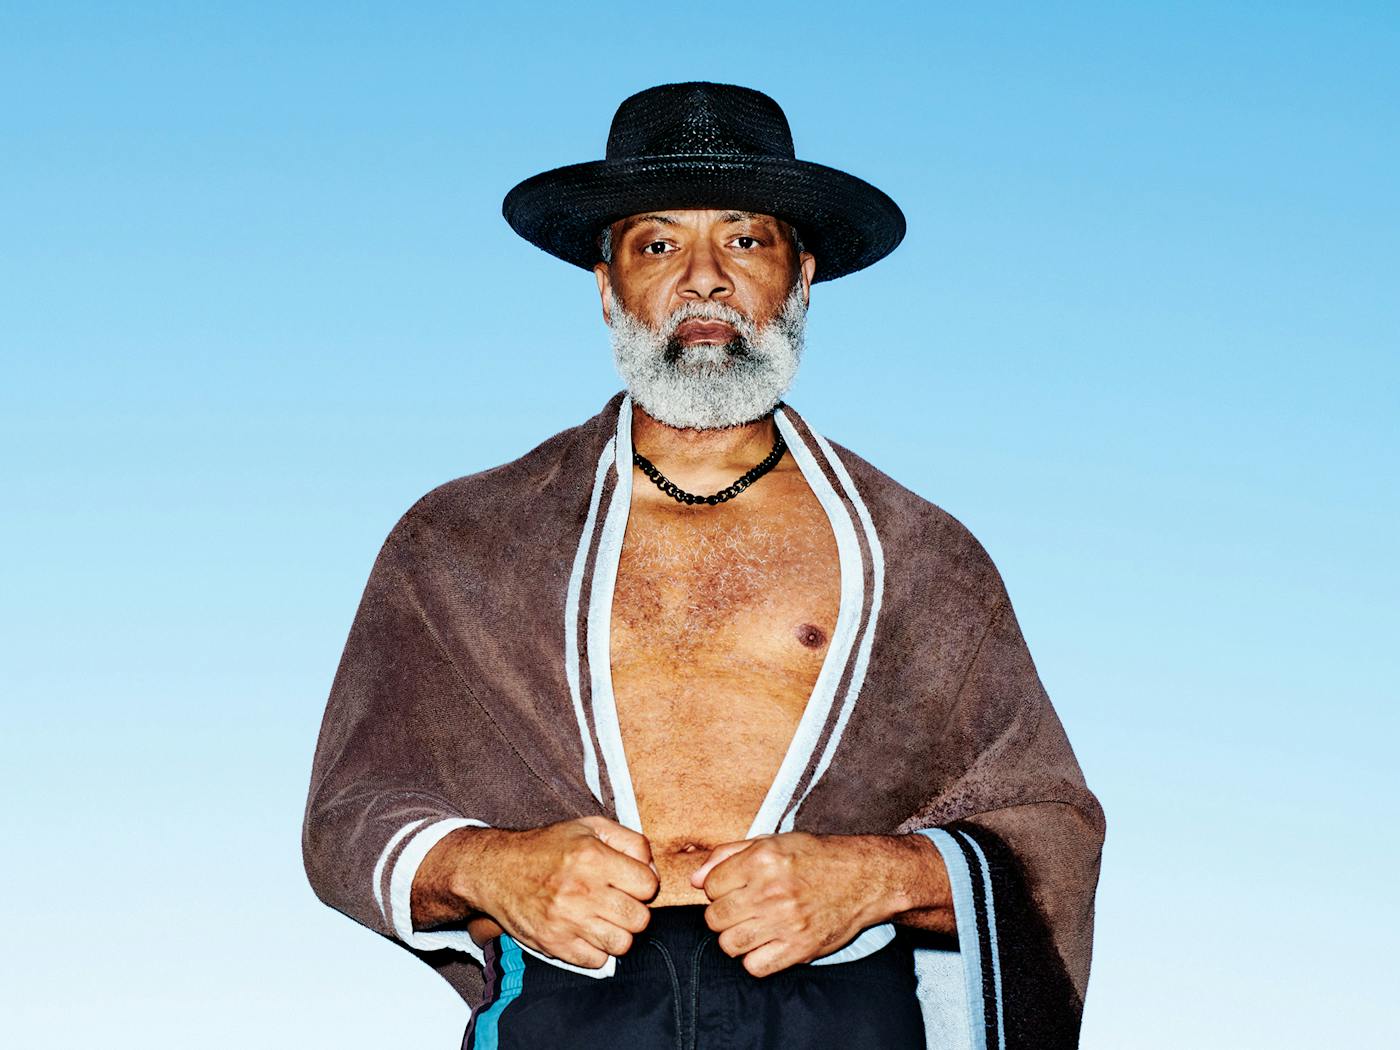 Meet Irvin Randle, the 60-Year-Old Insta Star Your Grandma Wants to Date